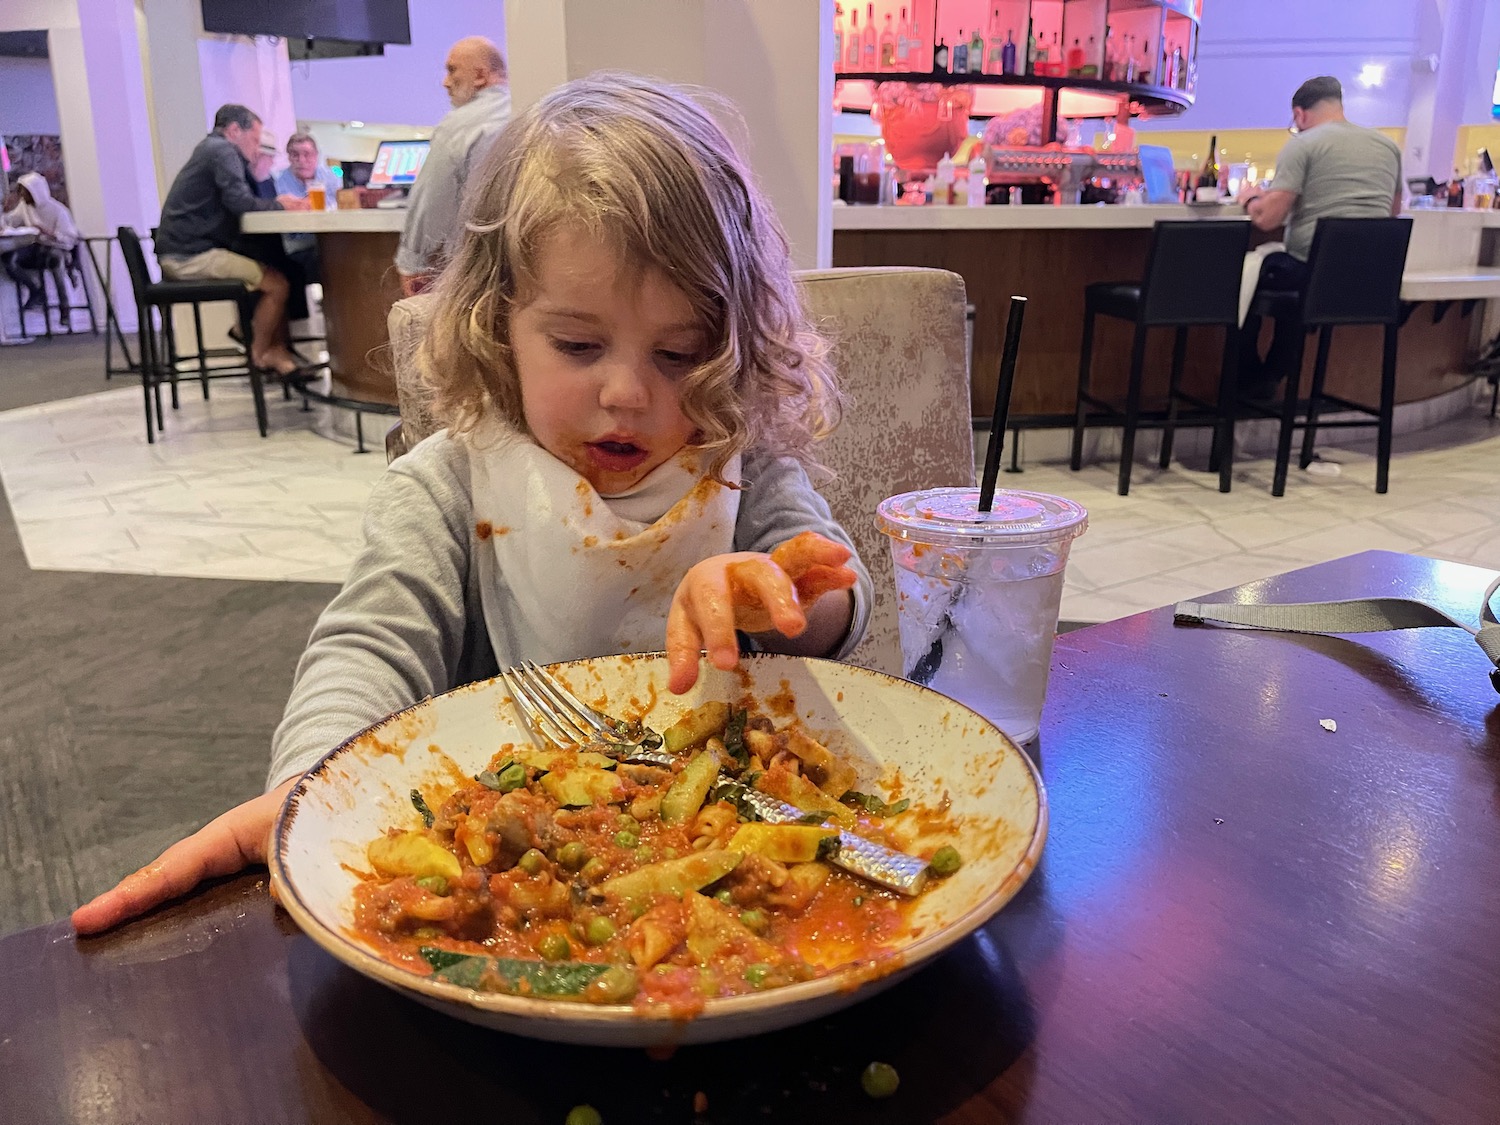 a child eating food at a restaurant